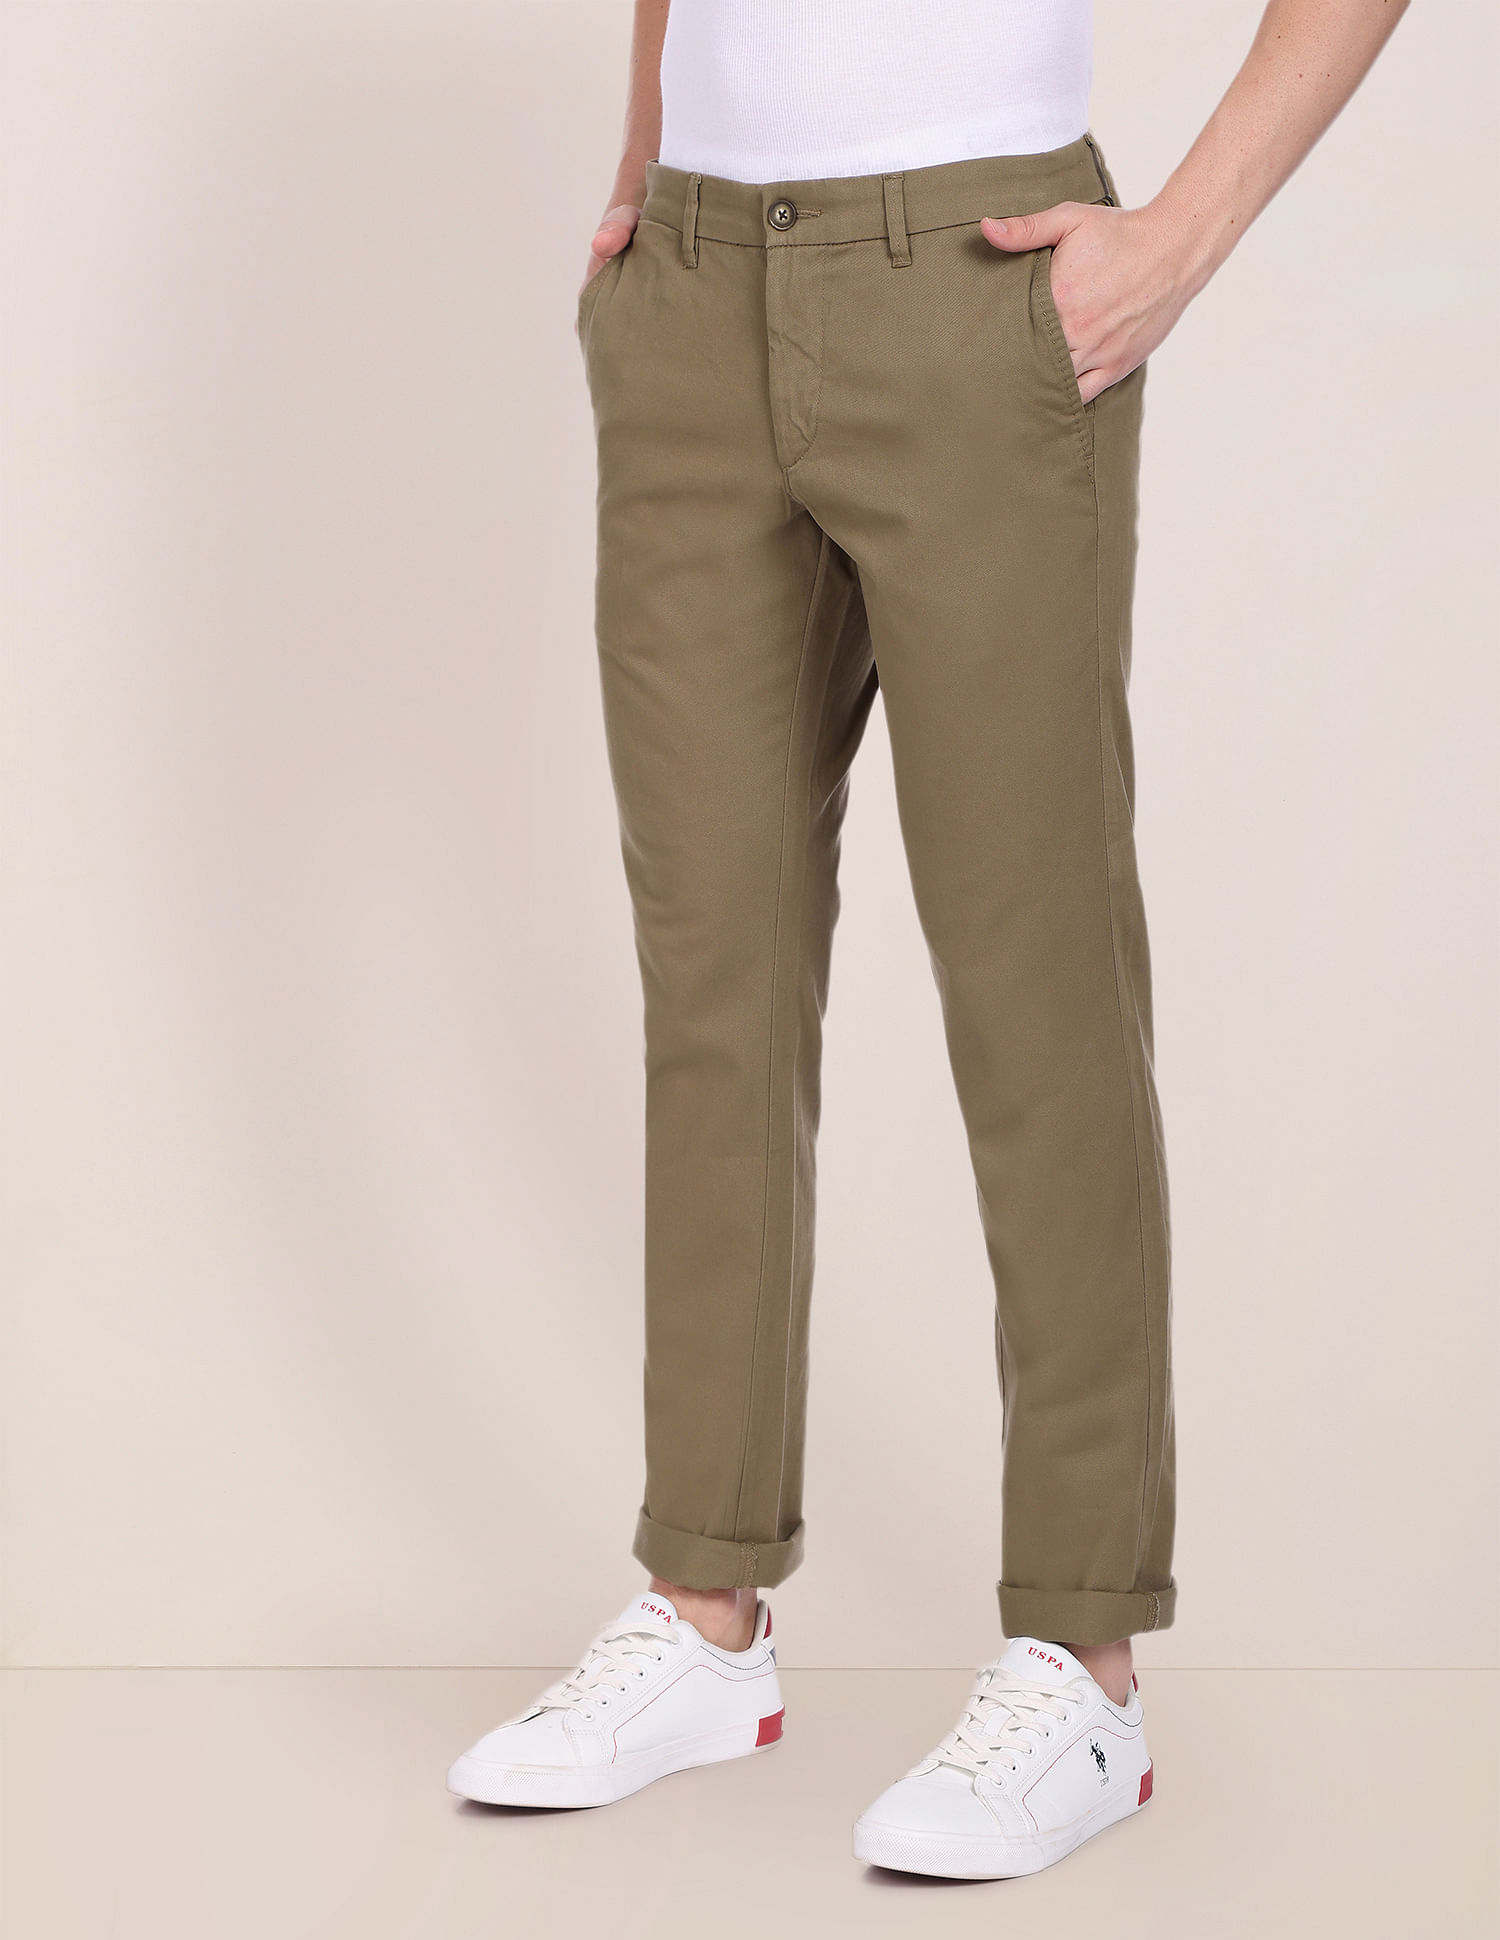 U.S. POLO ASSN. Men's Casual Trousers (8907378961648_USTR6507_40W x  34L_Dark Olive) : Amazon.in: Clothing & Accessories